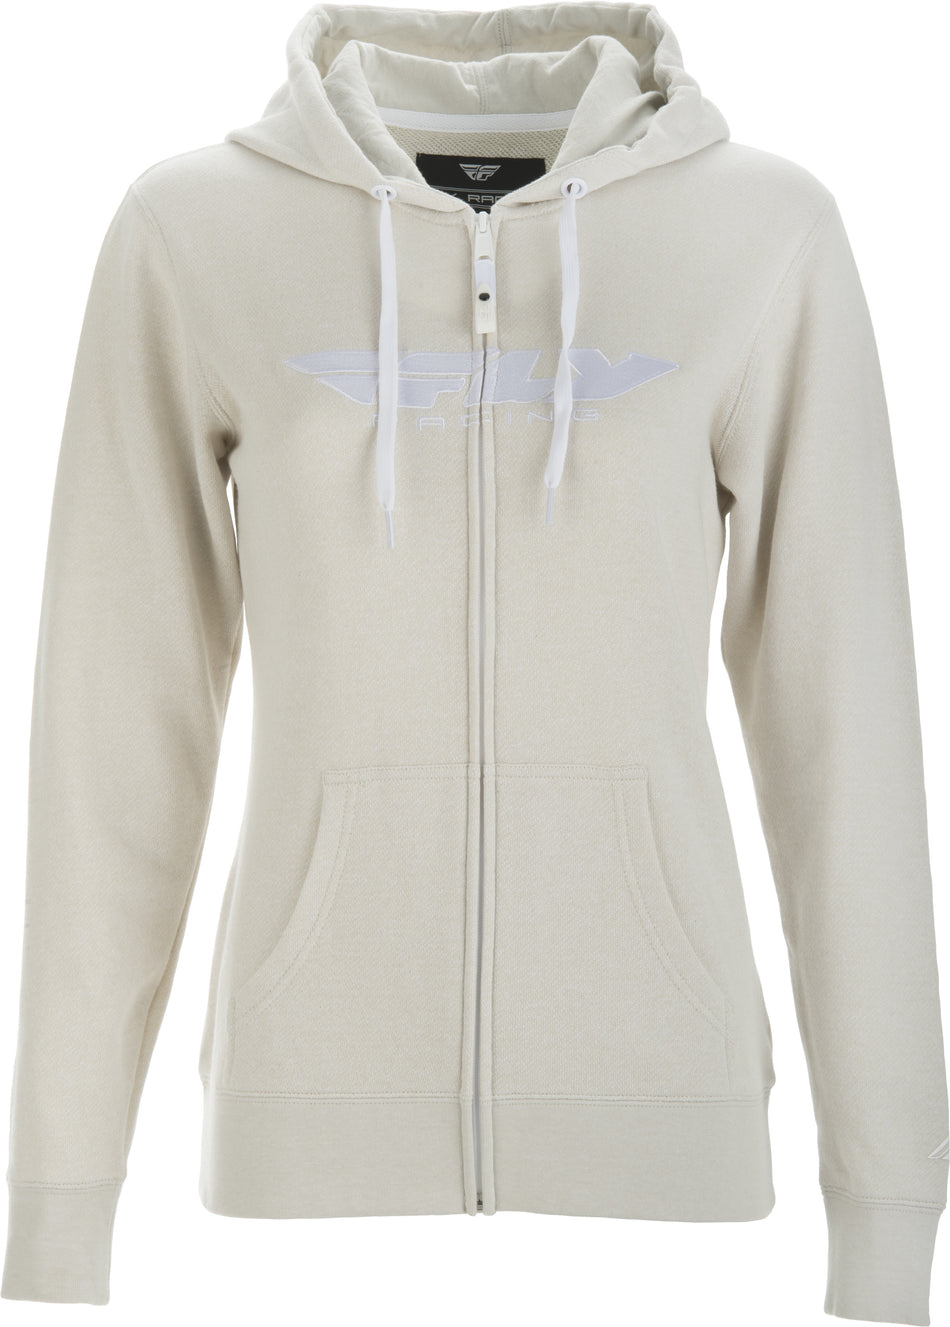 FLY RACING Fly Women's Corporate Zip Up Hoodie Ivory Lg 358-5094L